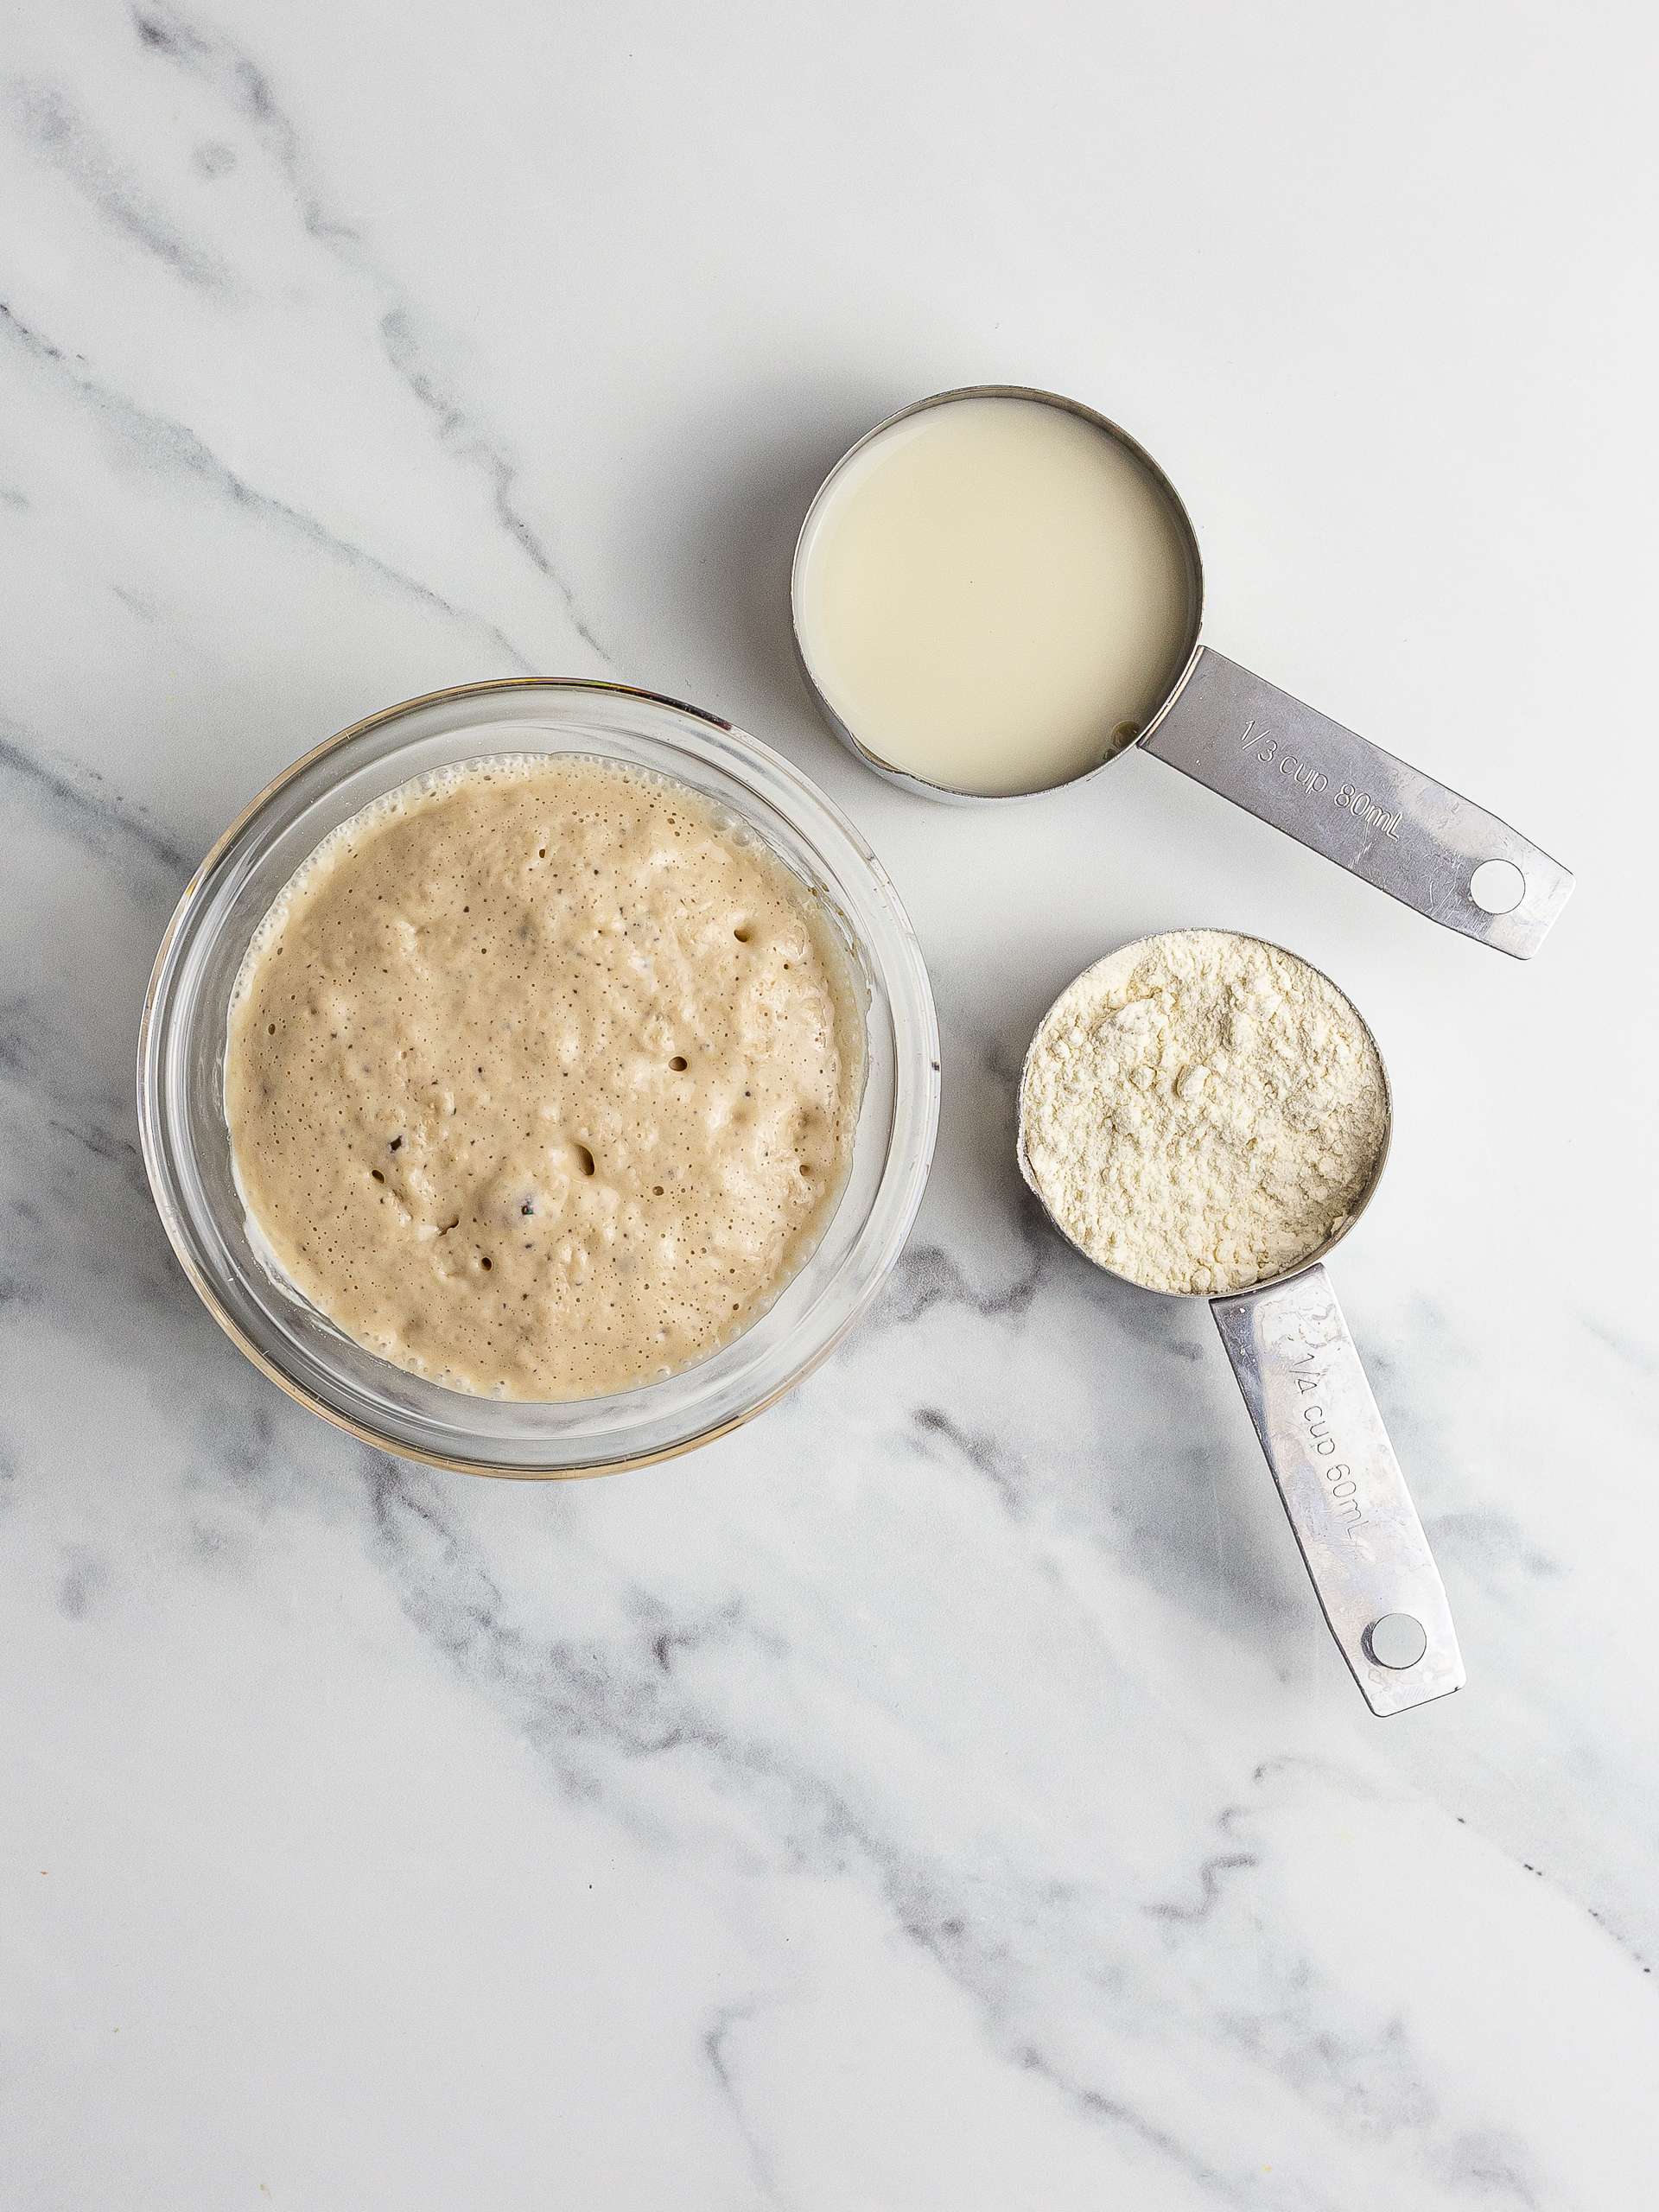 activated dry yeast with flour and milk